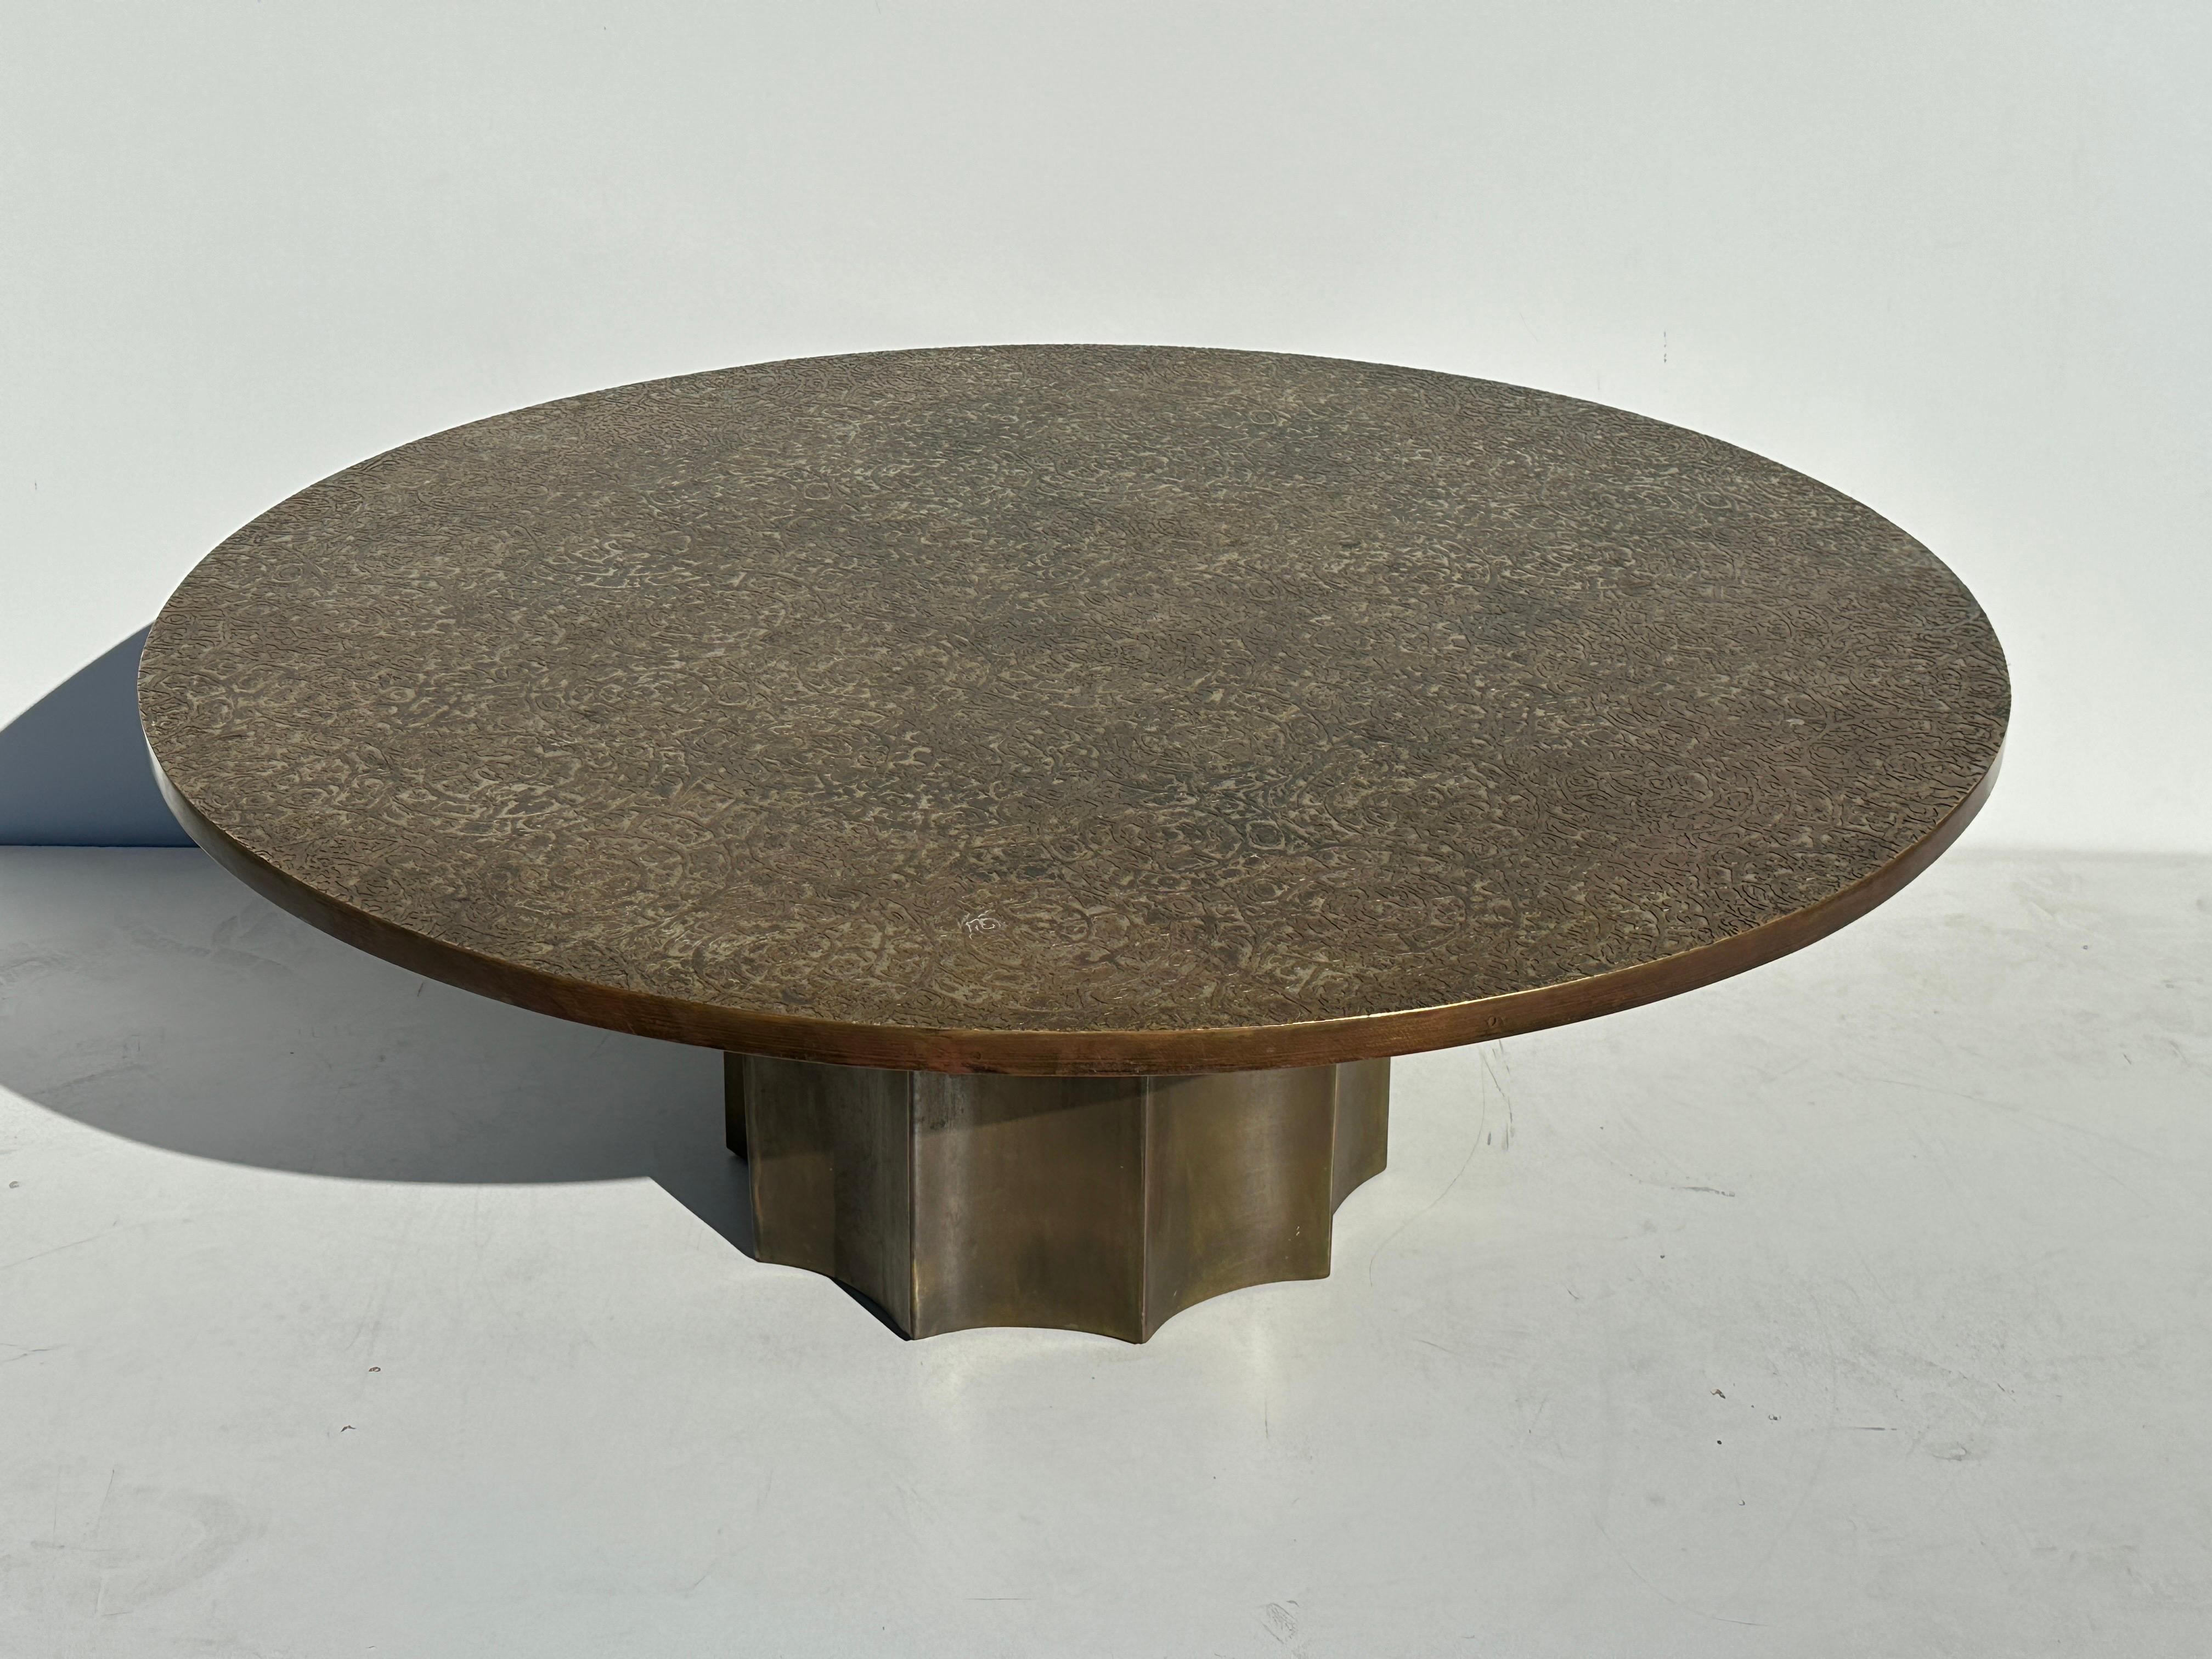 Acid etched Etruscan coffee table in bronze and pewter by father and son duo Philip and Kelvin LaVerne with rare base. Top is 48” diameter by 1” thick. Base is 19” diameter by 16” high.